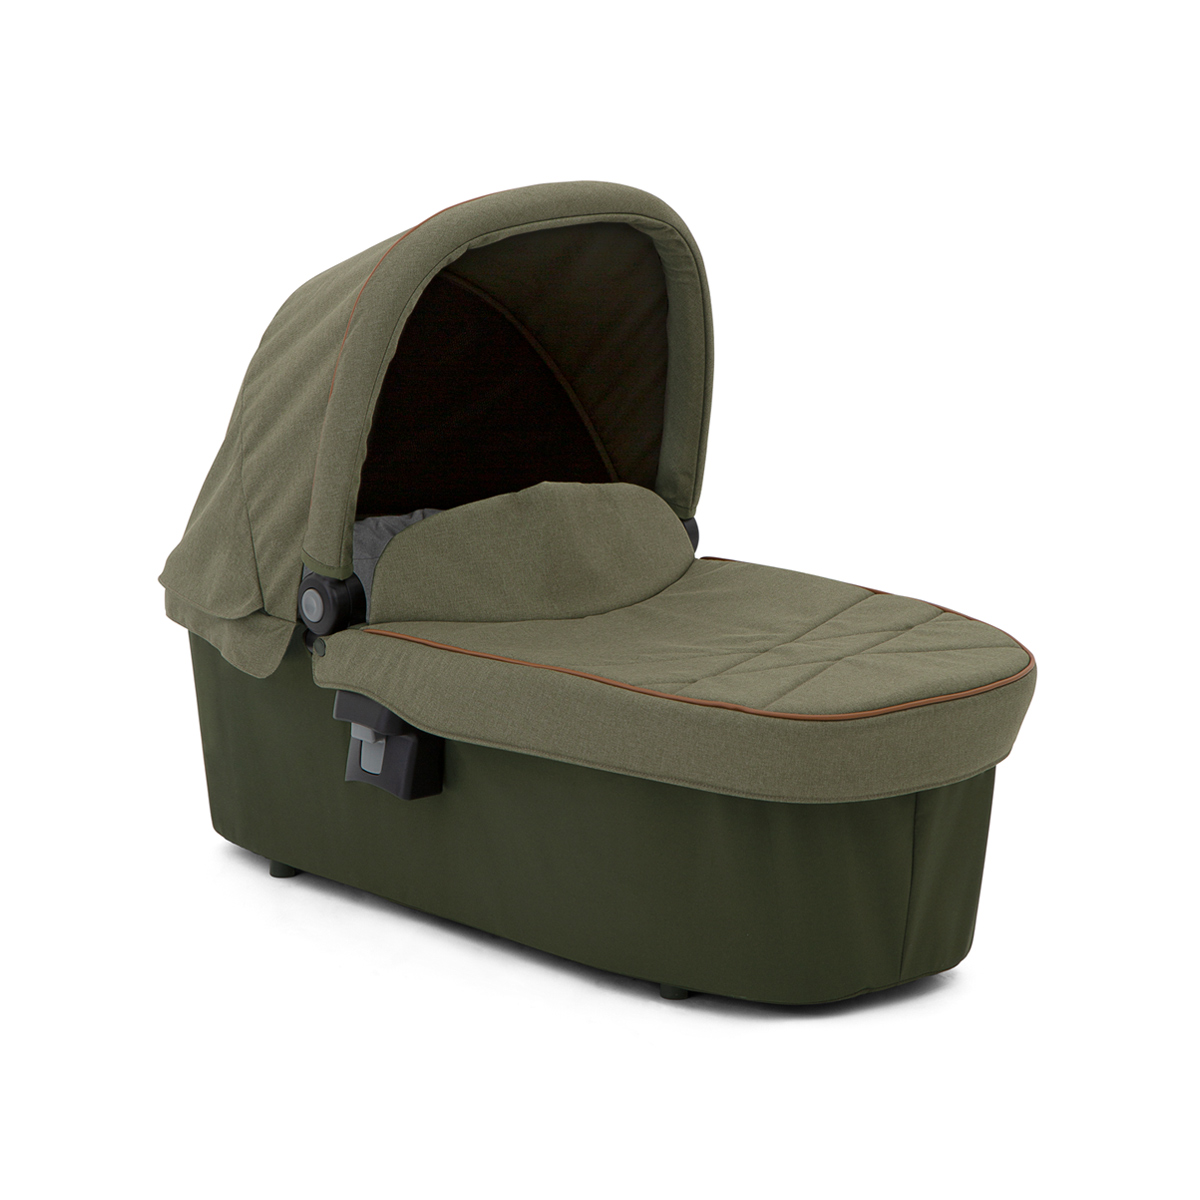 Graco Near2Me™ carrycot with apron three quarter angle